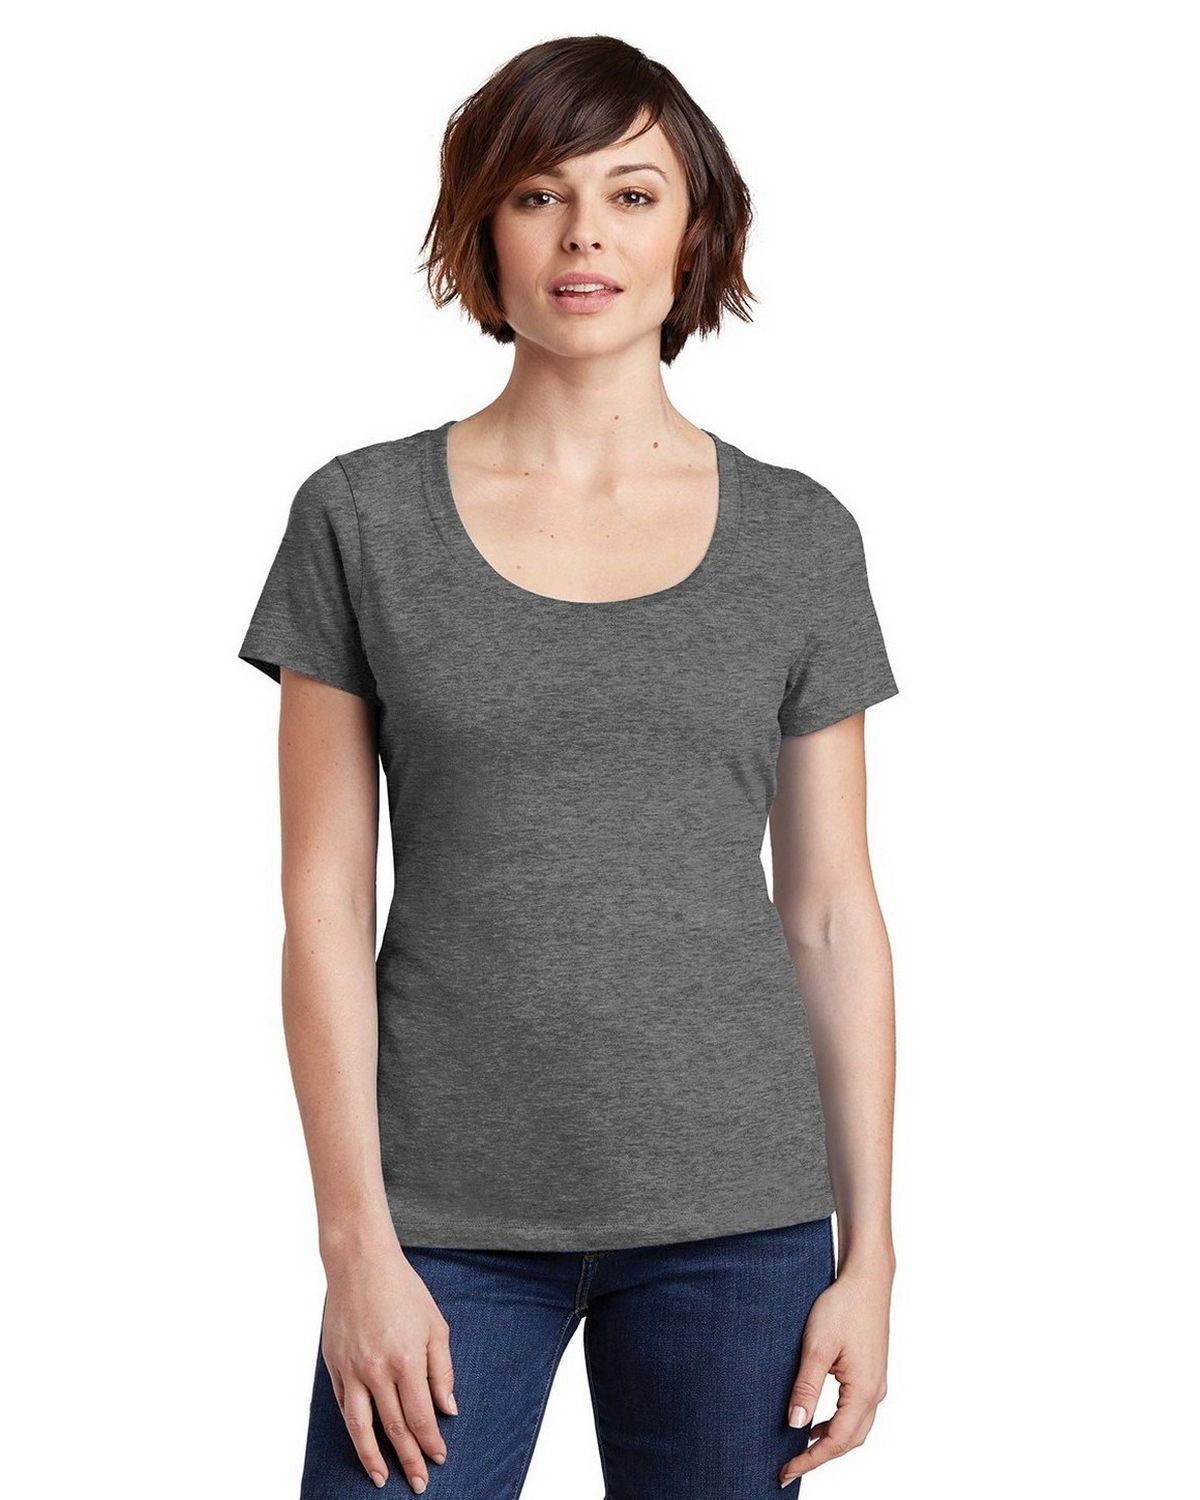 District Made DM106L Ladies Perfect Weight Scoop Tee - Apparelnbags.com